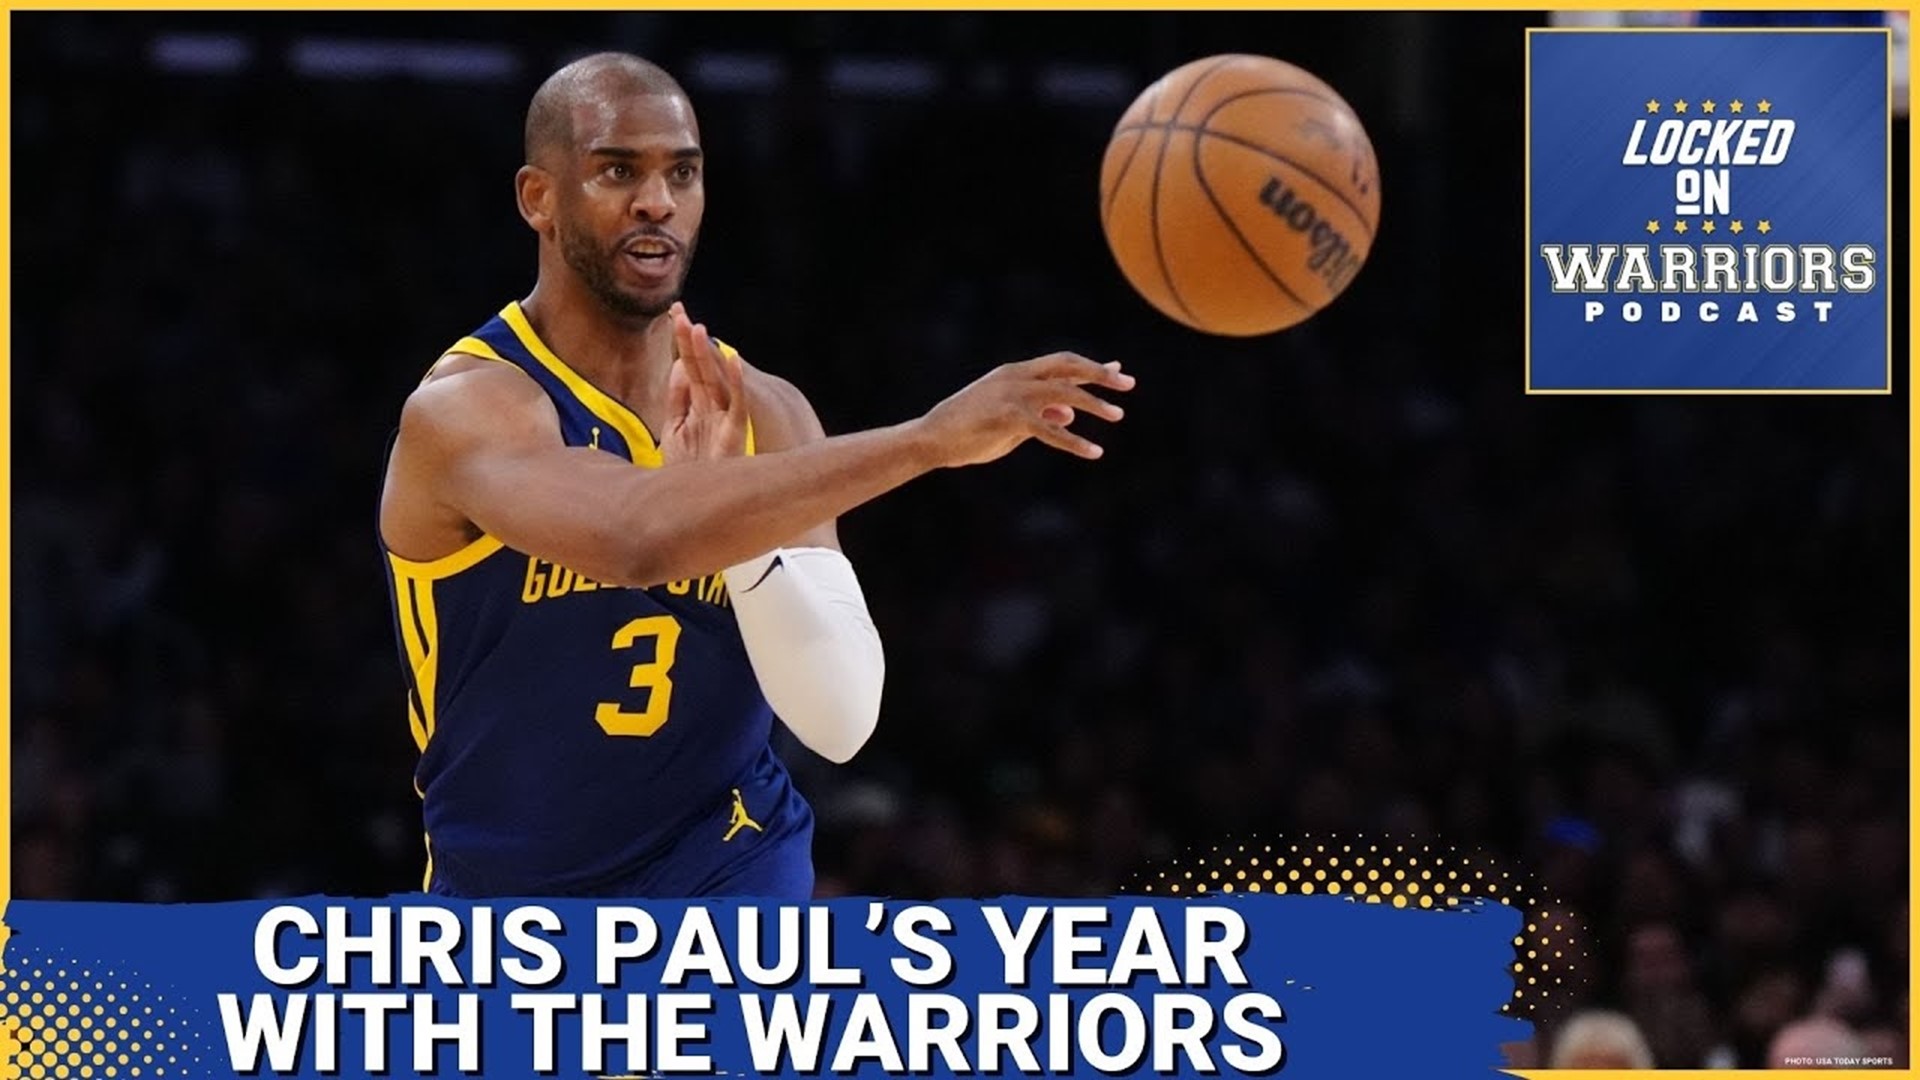 Cyrus Saatsaz discussed the year that was for Chris Paul in a Golden State Warriors jersey and what Mike Dunleavy Jr.'s plans are moving forward.